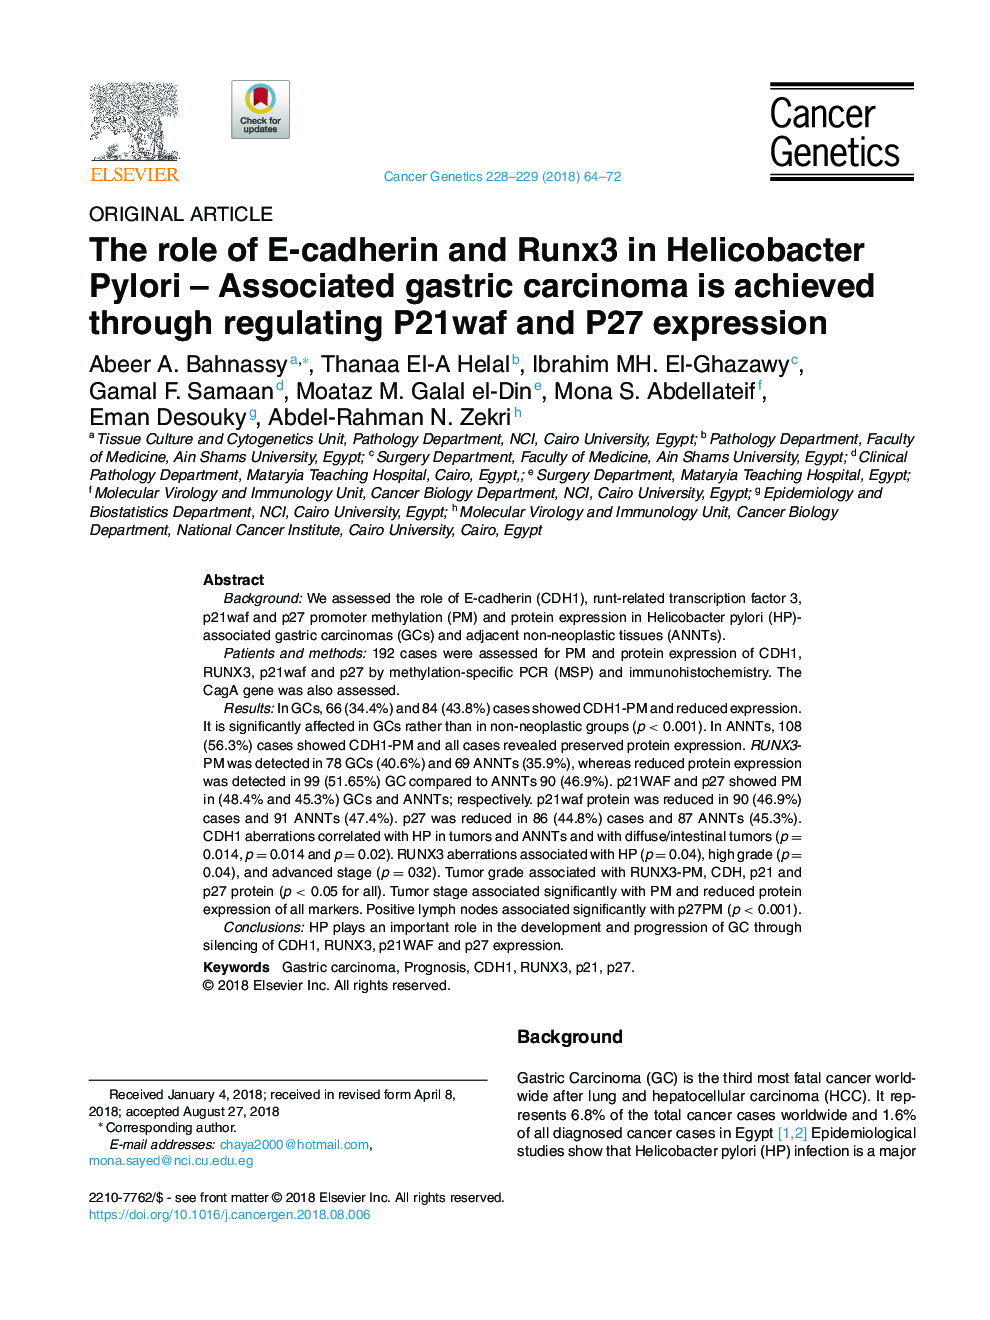 The role of E-cadherin and Runx3 in Helicobacter Pylori - Associated gastric carcinoma is achieved through regulating P21waf and P27 expression